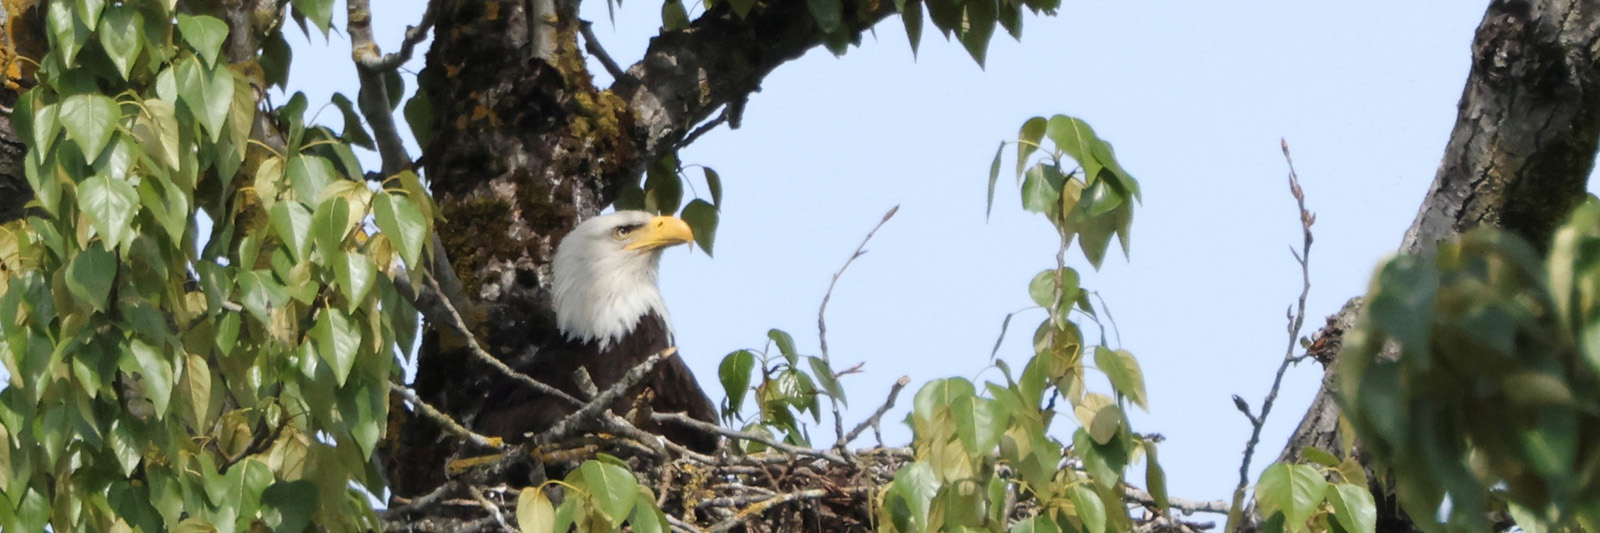 Eagle in nest-PAN-20240423